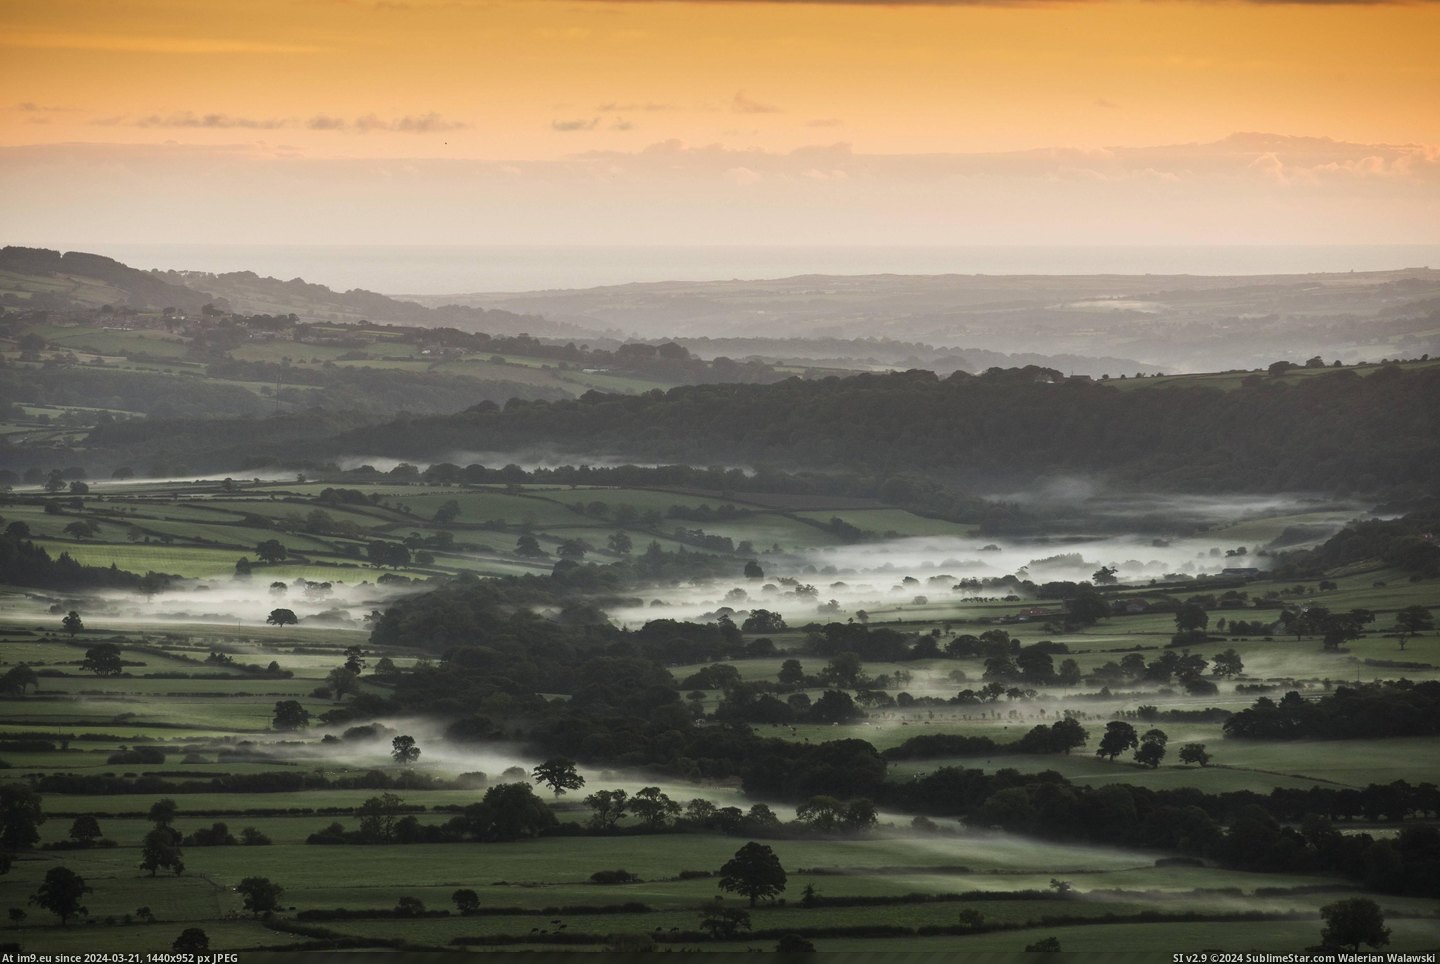 #Valley #North #Sunrise #Moors #Goathland #Lies #Mist #Yorkshire [Earthporn] Mist lies in a valley near Goathland in the North Yorkshire Moors at sunrise. [4666x3098] Pic. (Image of album My r/EARTHPORN favs))